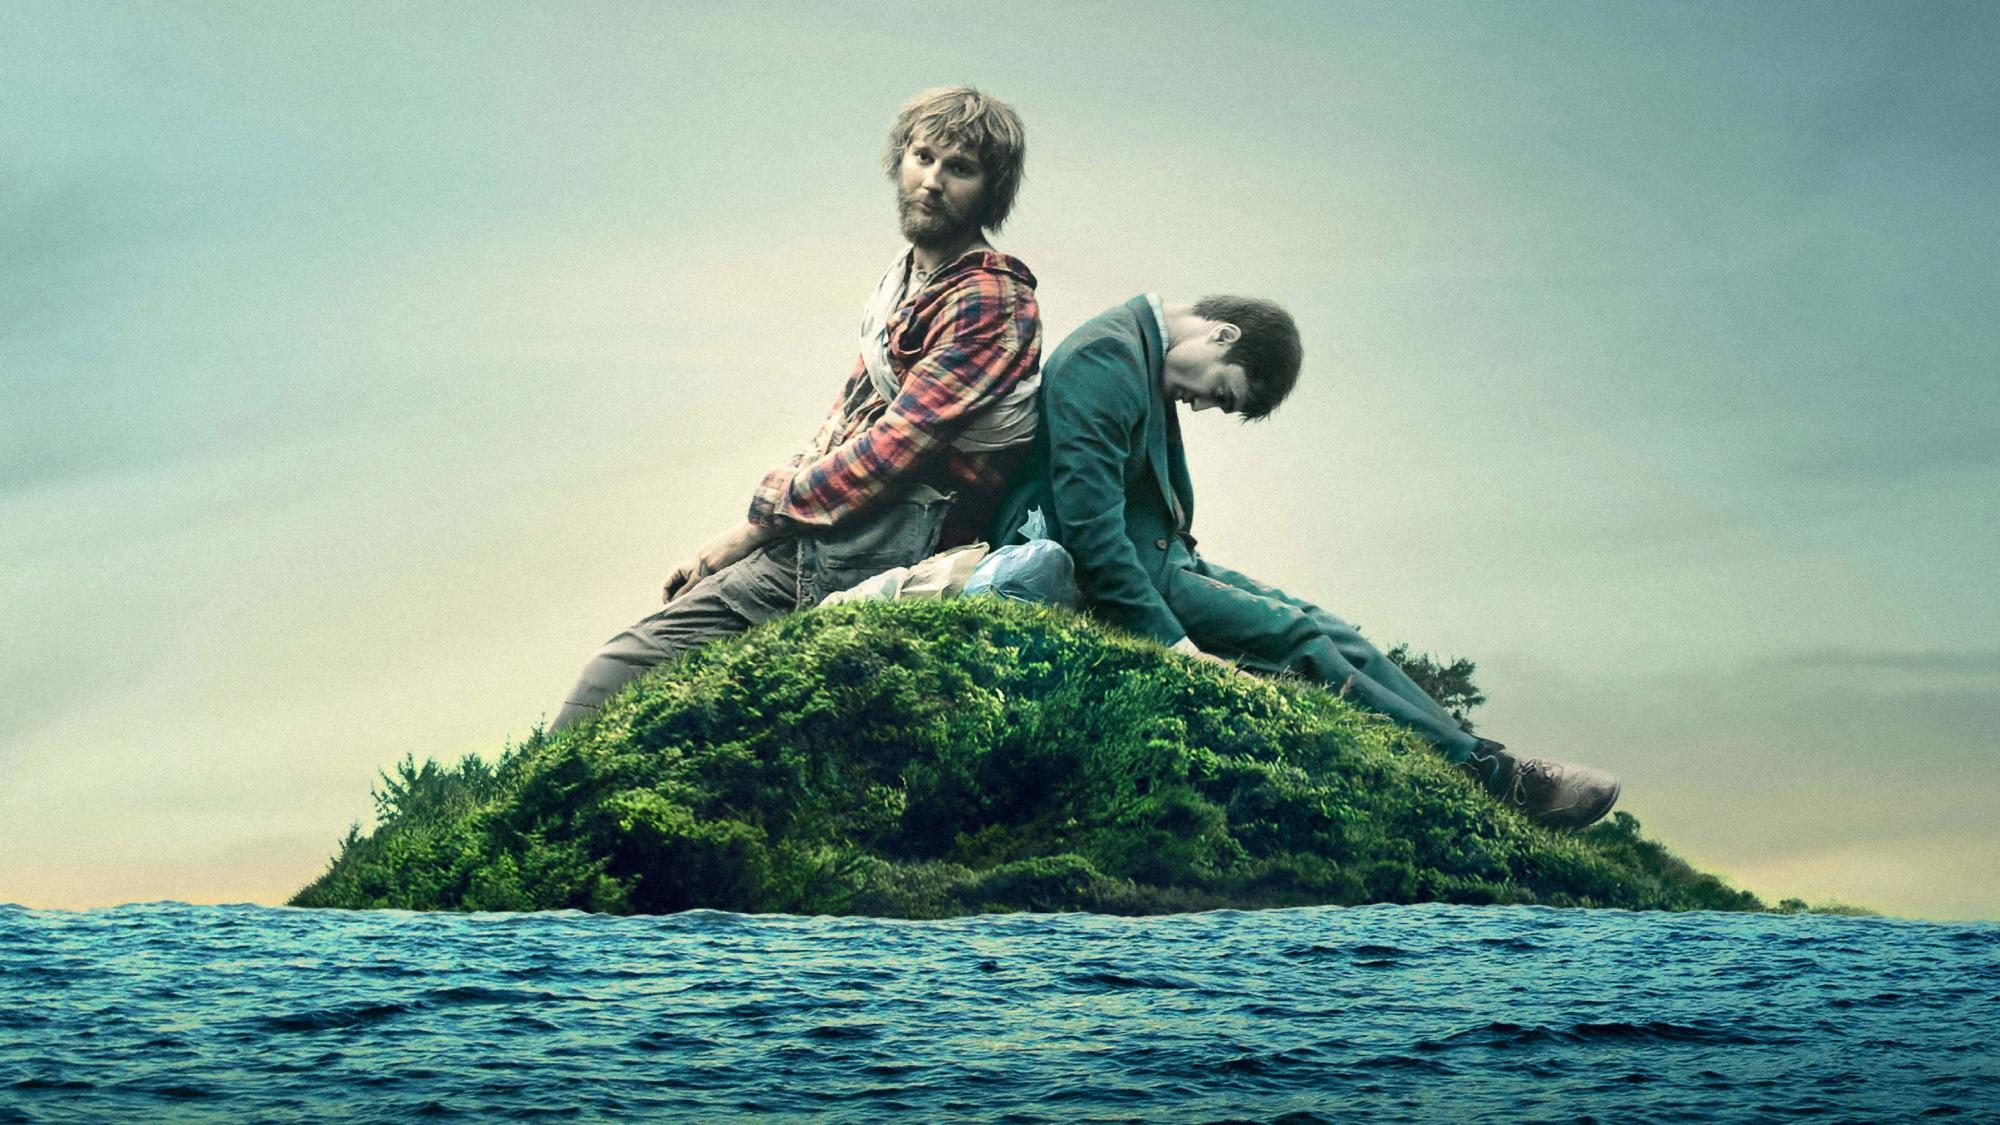 Backdrop Image for Swiss Army Man